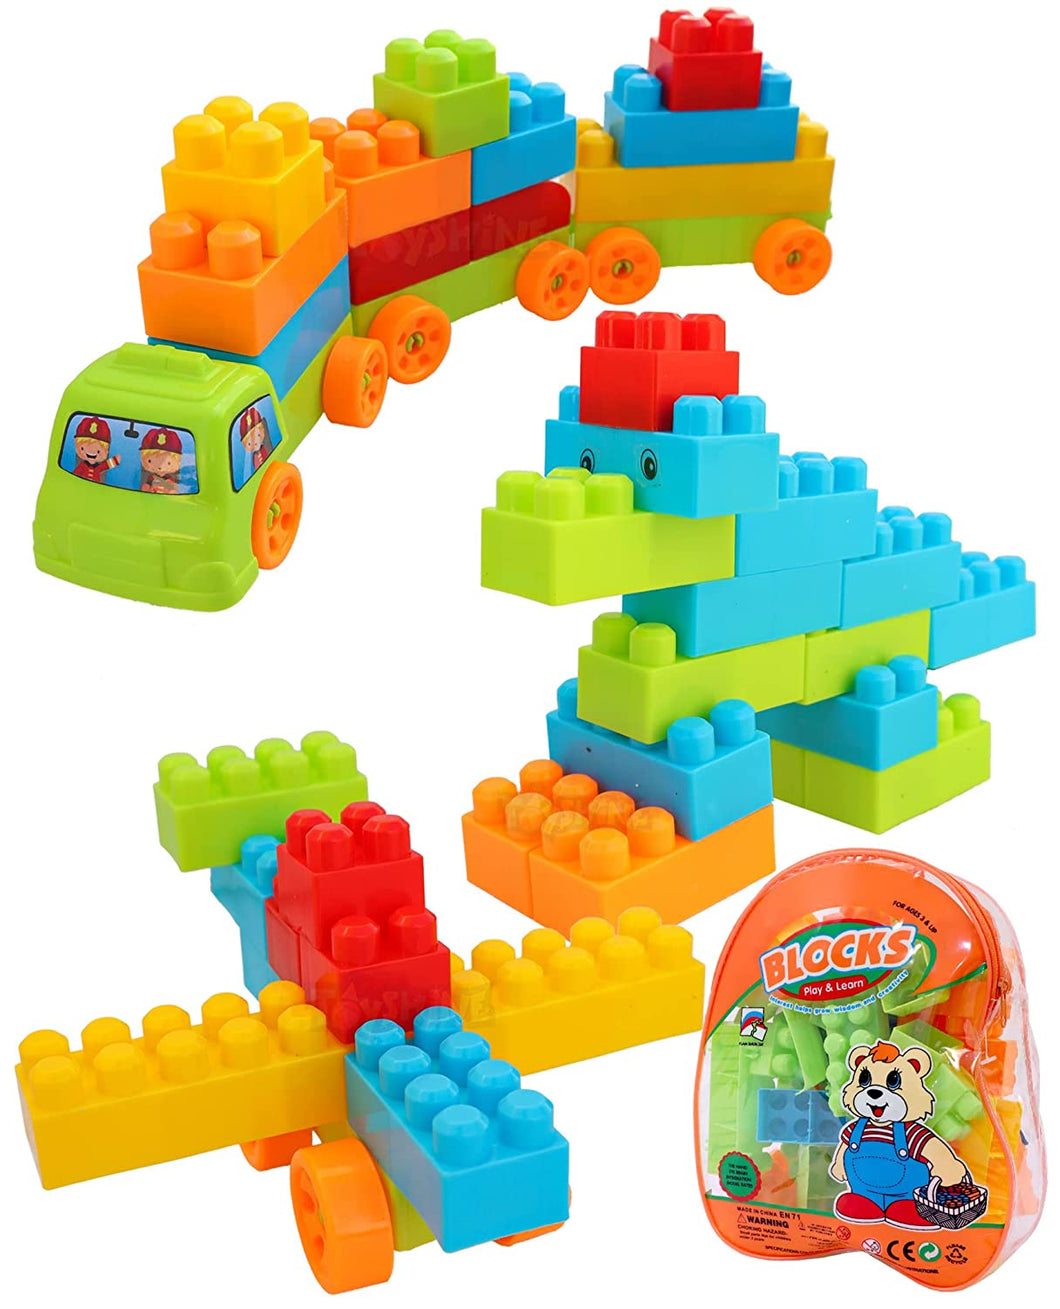 Toyshine 50 pcs Building Block Toys with Wheels for Kids, Bag Packing, Best Gift Toy for Kids